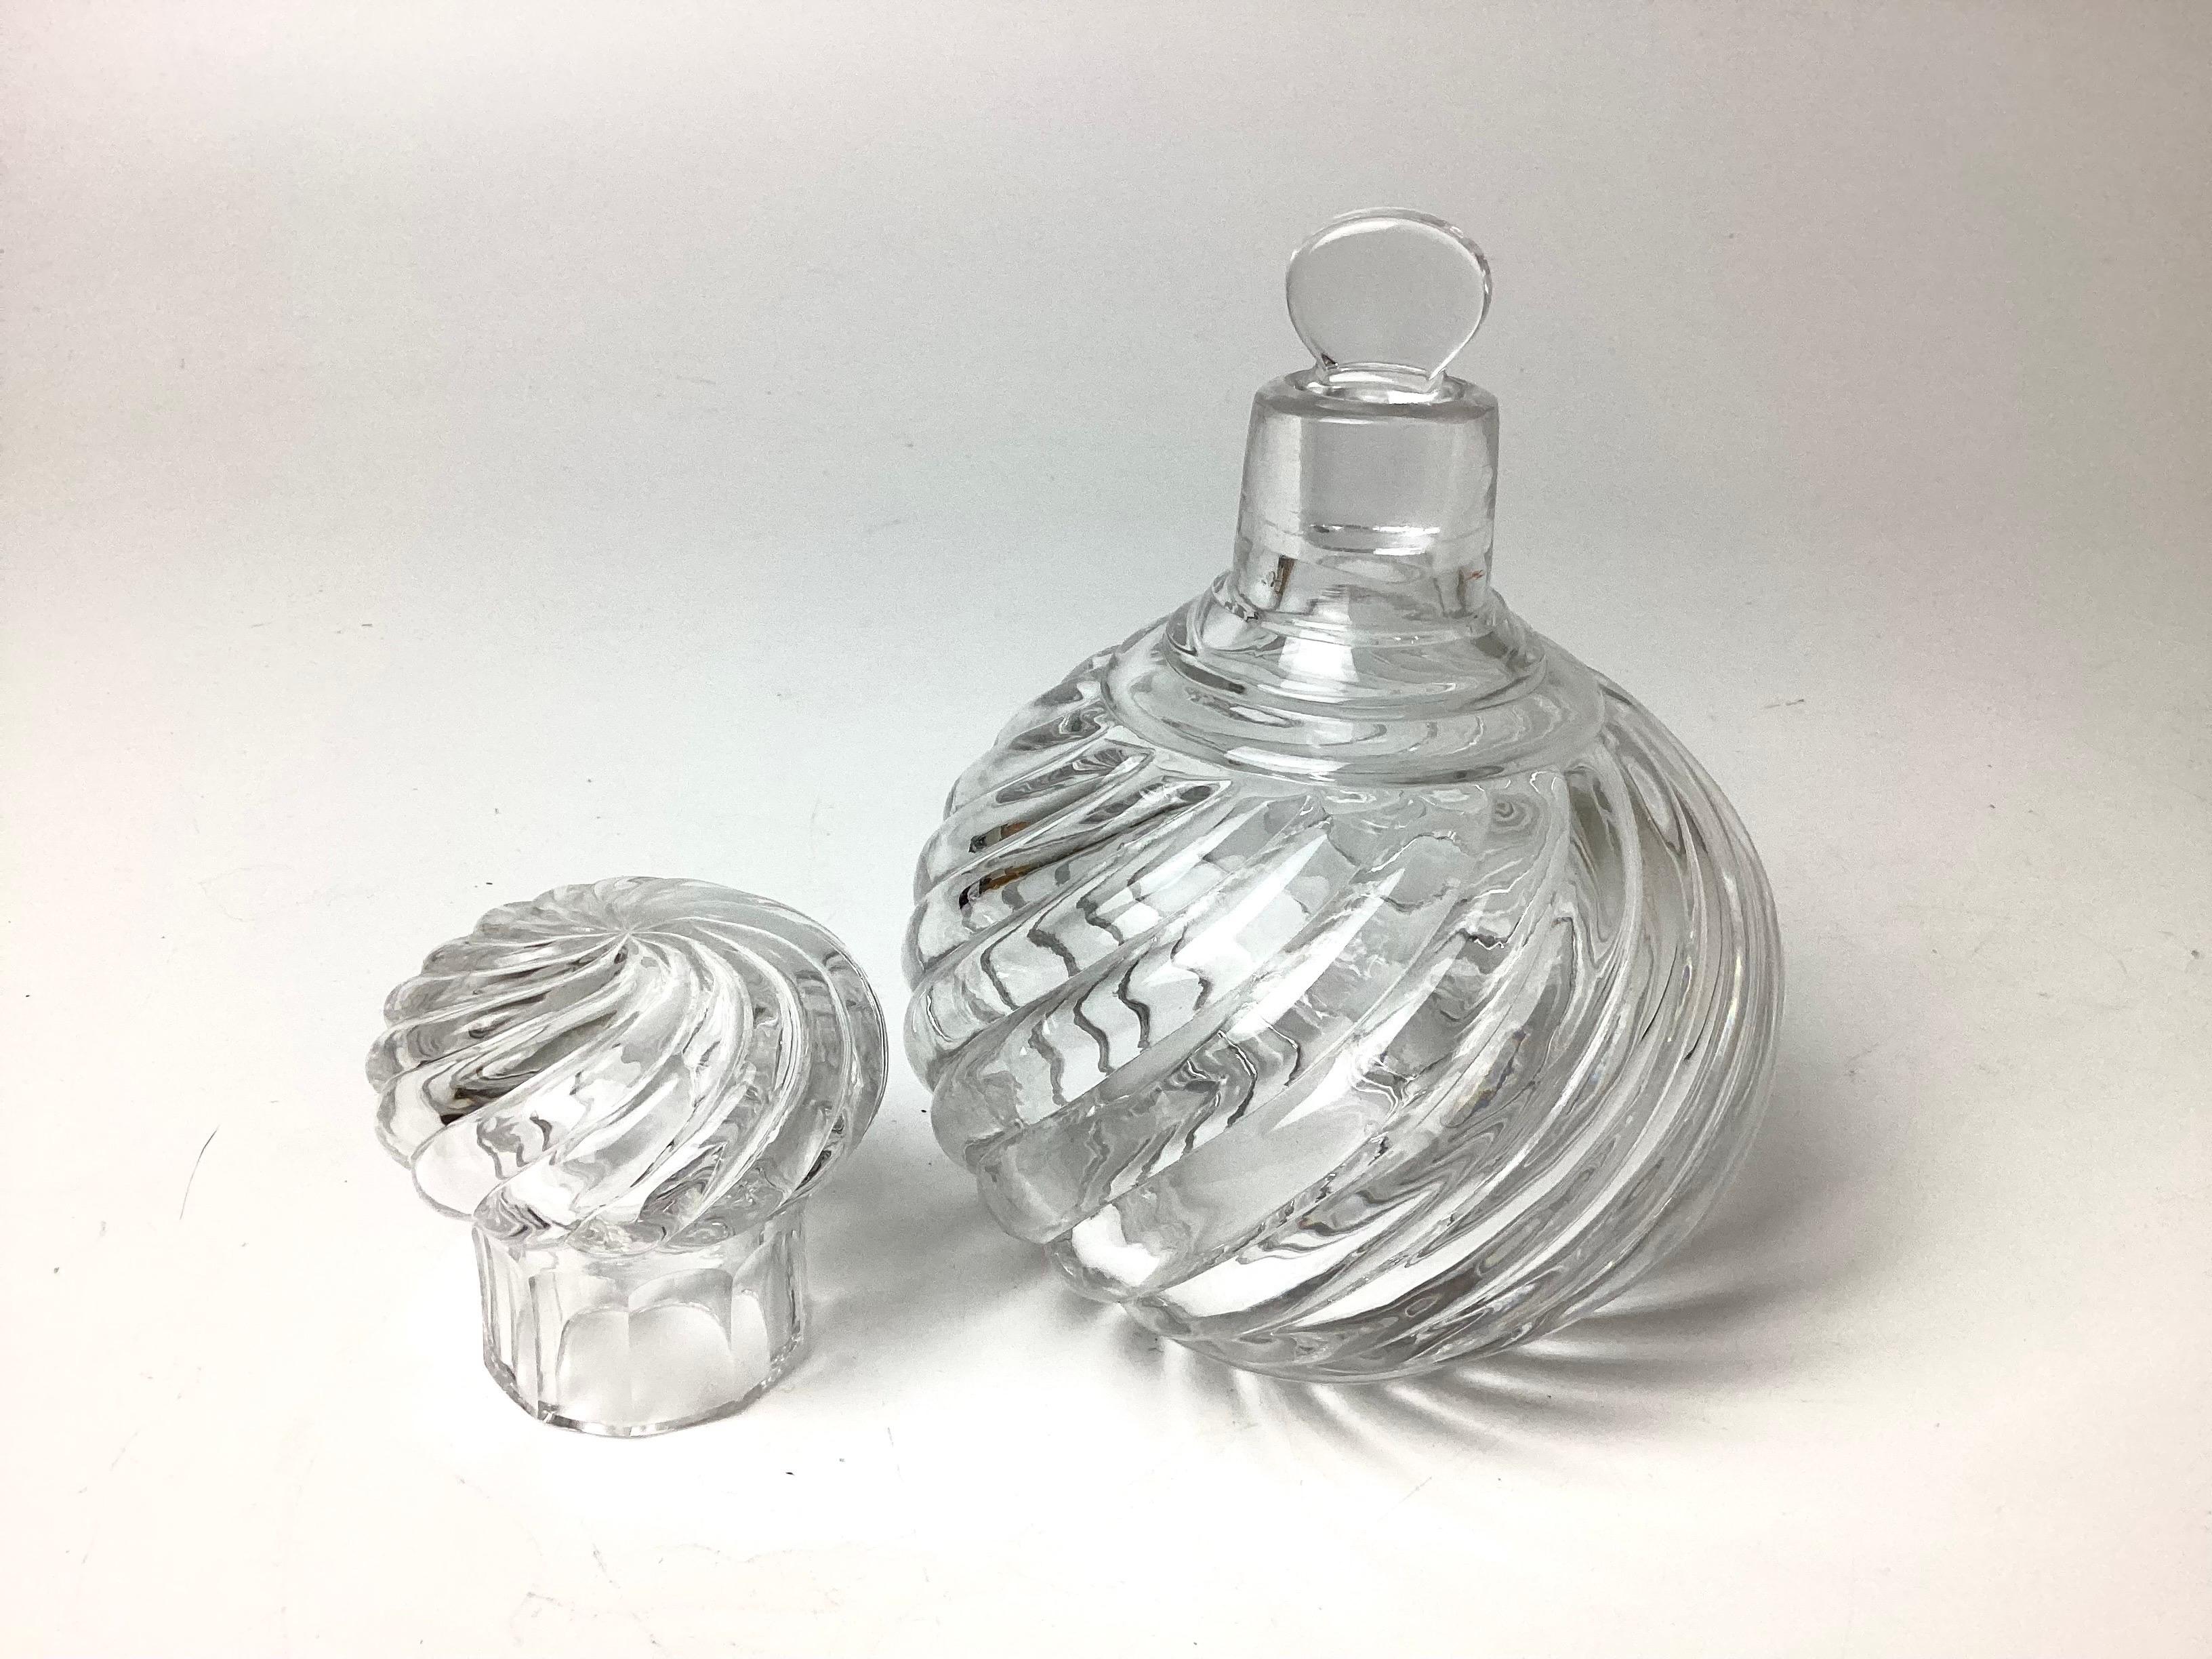 Early Baccarat crystal swirl perfume or cologne bottle. This is a large bottle 6 1/4